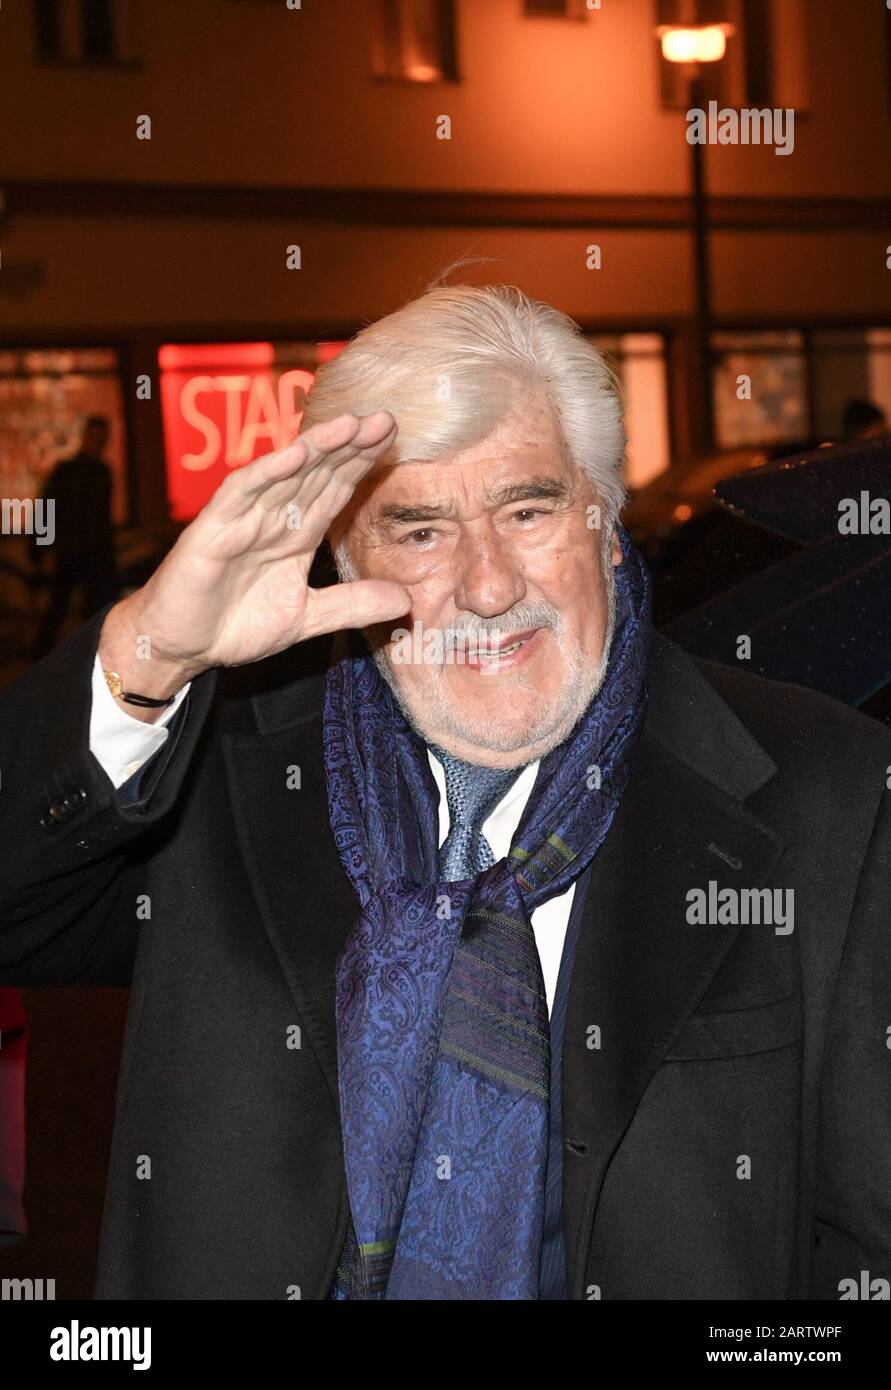 Berlin, Germany. 29th Jan, 2020. Mario Adorf comes to the Babylon cinema for the presentation of the Ernst Lubitsch Prize. The Club of Film Journalists Berlin traditionally honours the best comedic performance in a German-language cinema film on 29 January, the birthday of Ernst Lubitsch. Credit: Jens Kalaene/dpa-Zentralbild/dpa/Alamy Live News Stock Photo